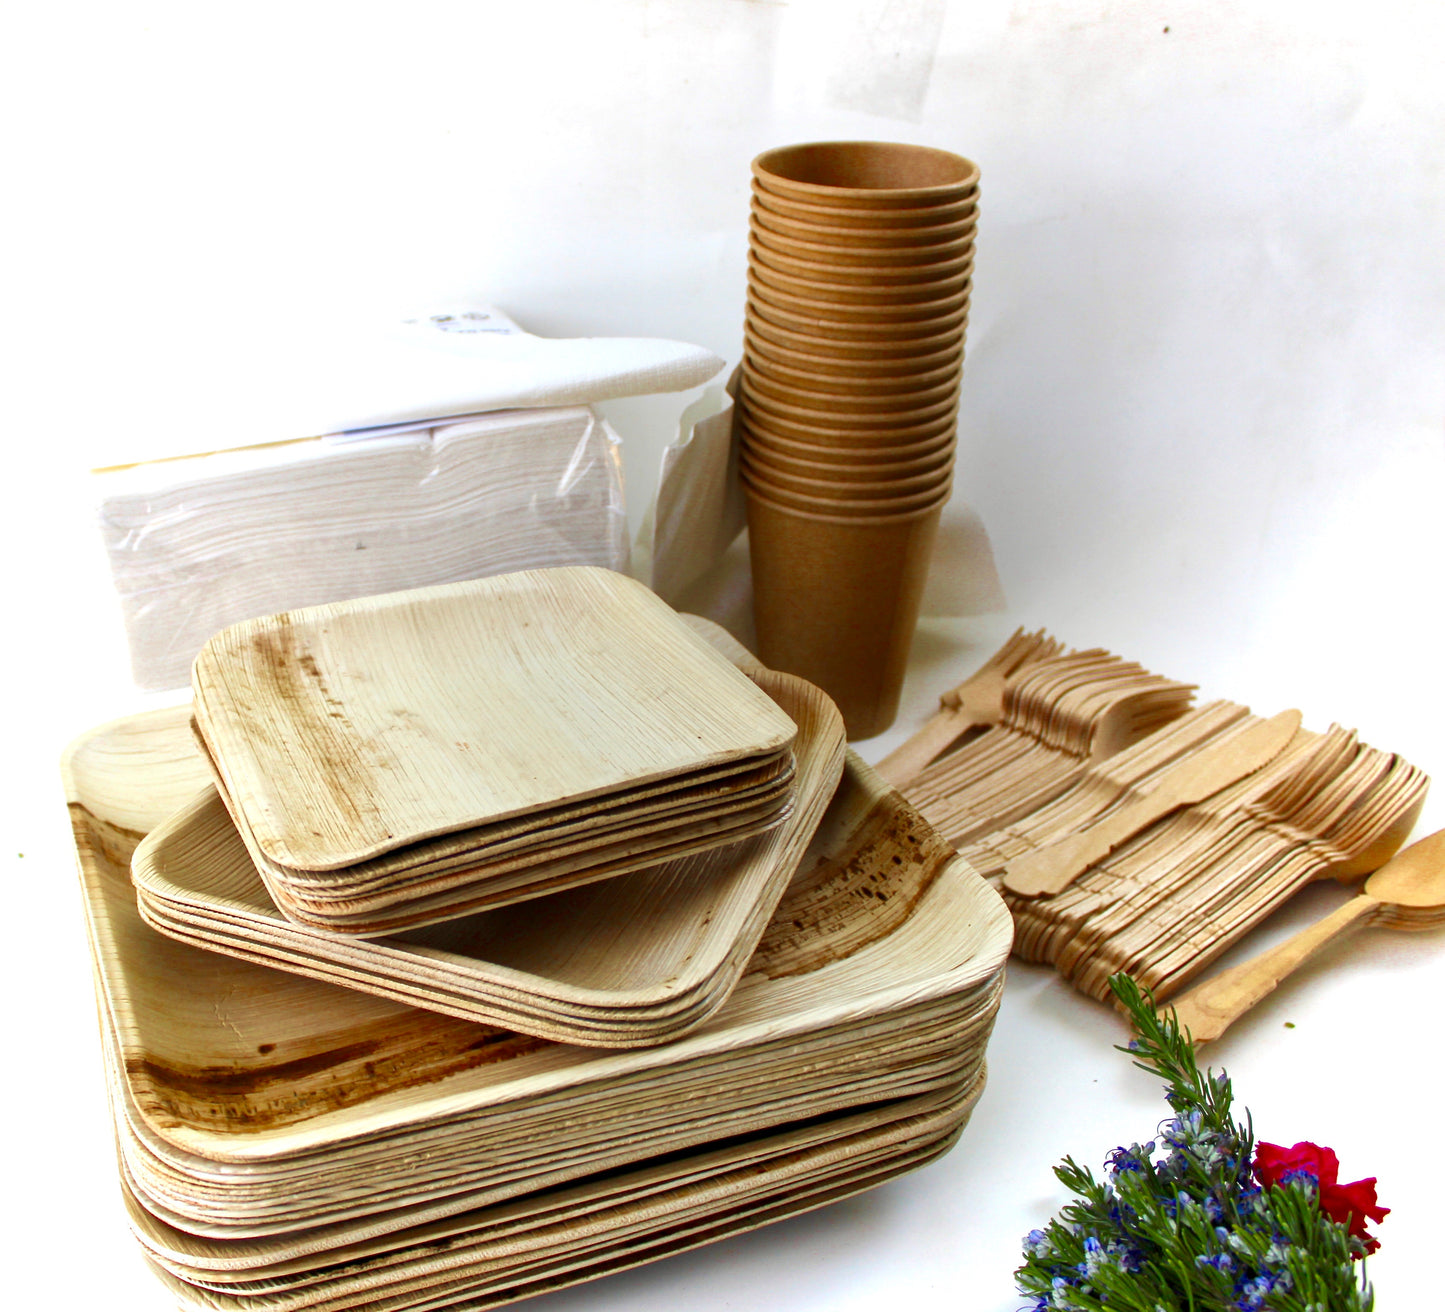 f Bamboo Type Palm Leaf 25 Pic 10"Square  - 25 pice  5" Bowl "- 25  pic  cup  - 75 pic Cutlery - 50 Pic Napkin